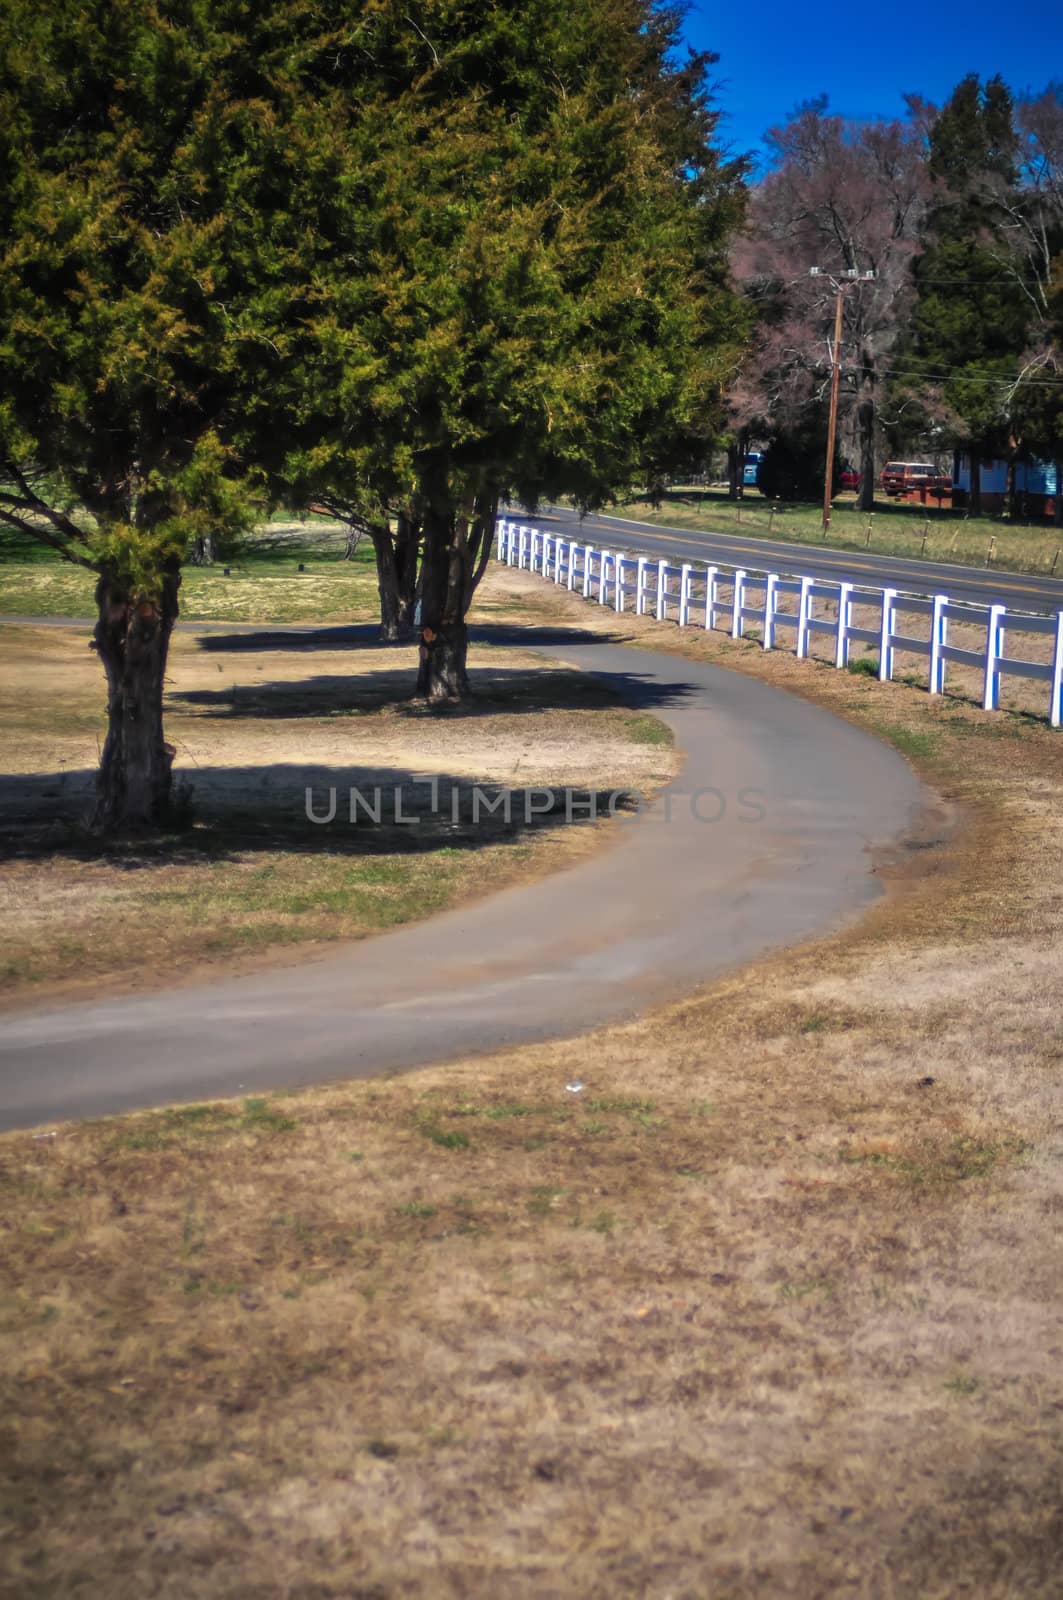 country sidewalk with white fence